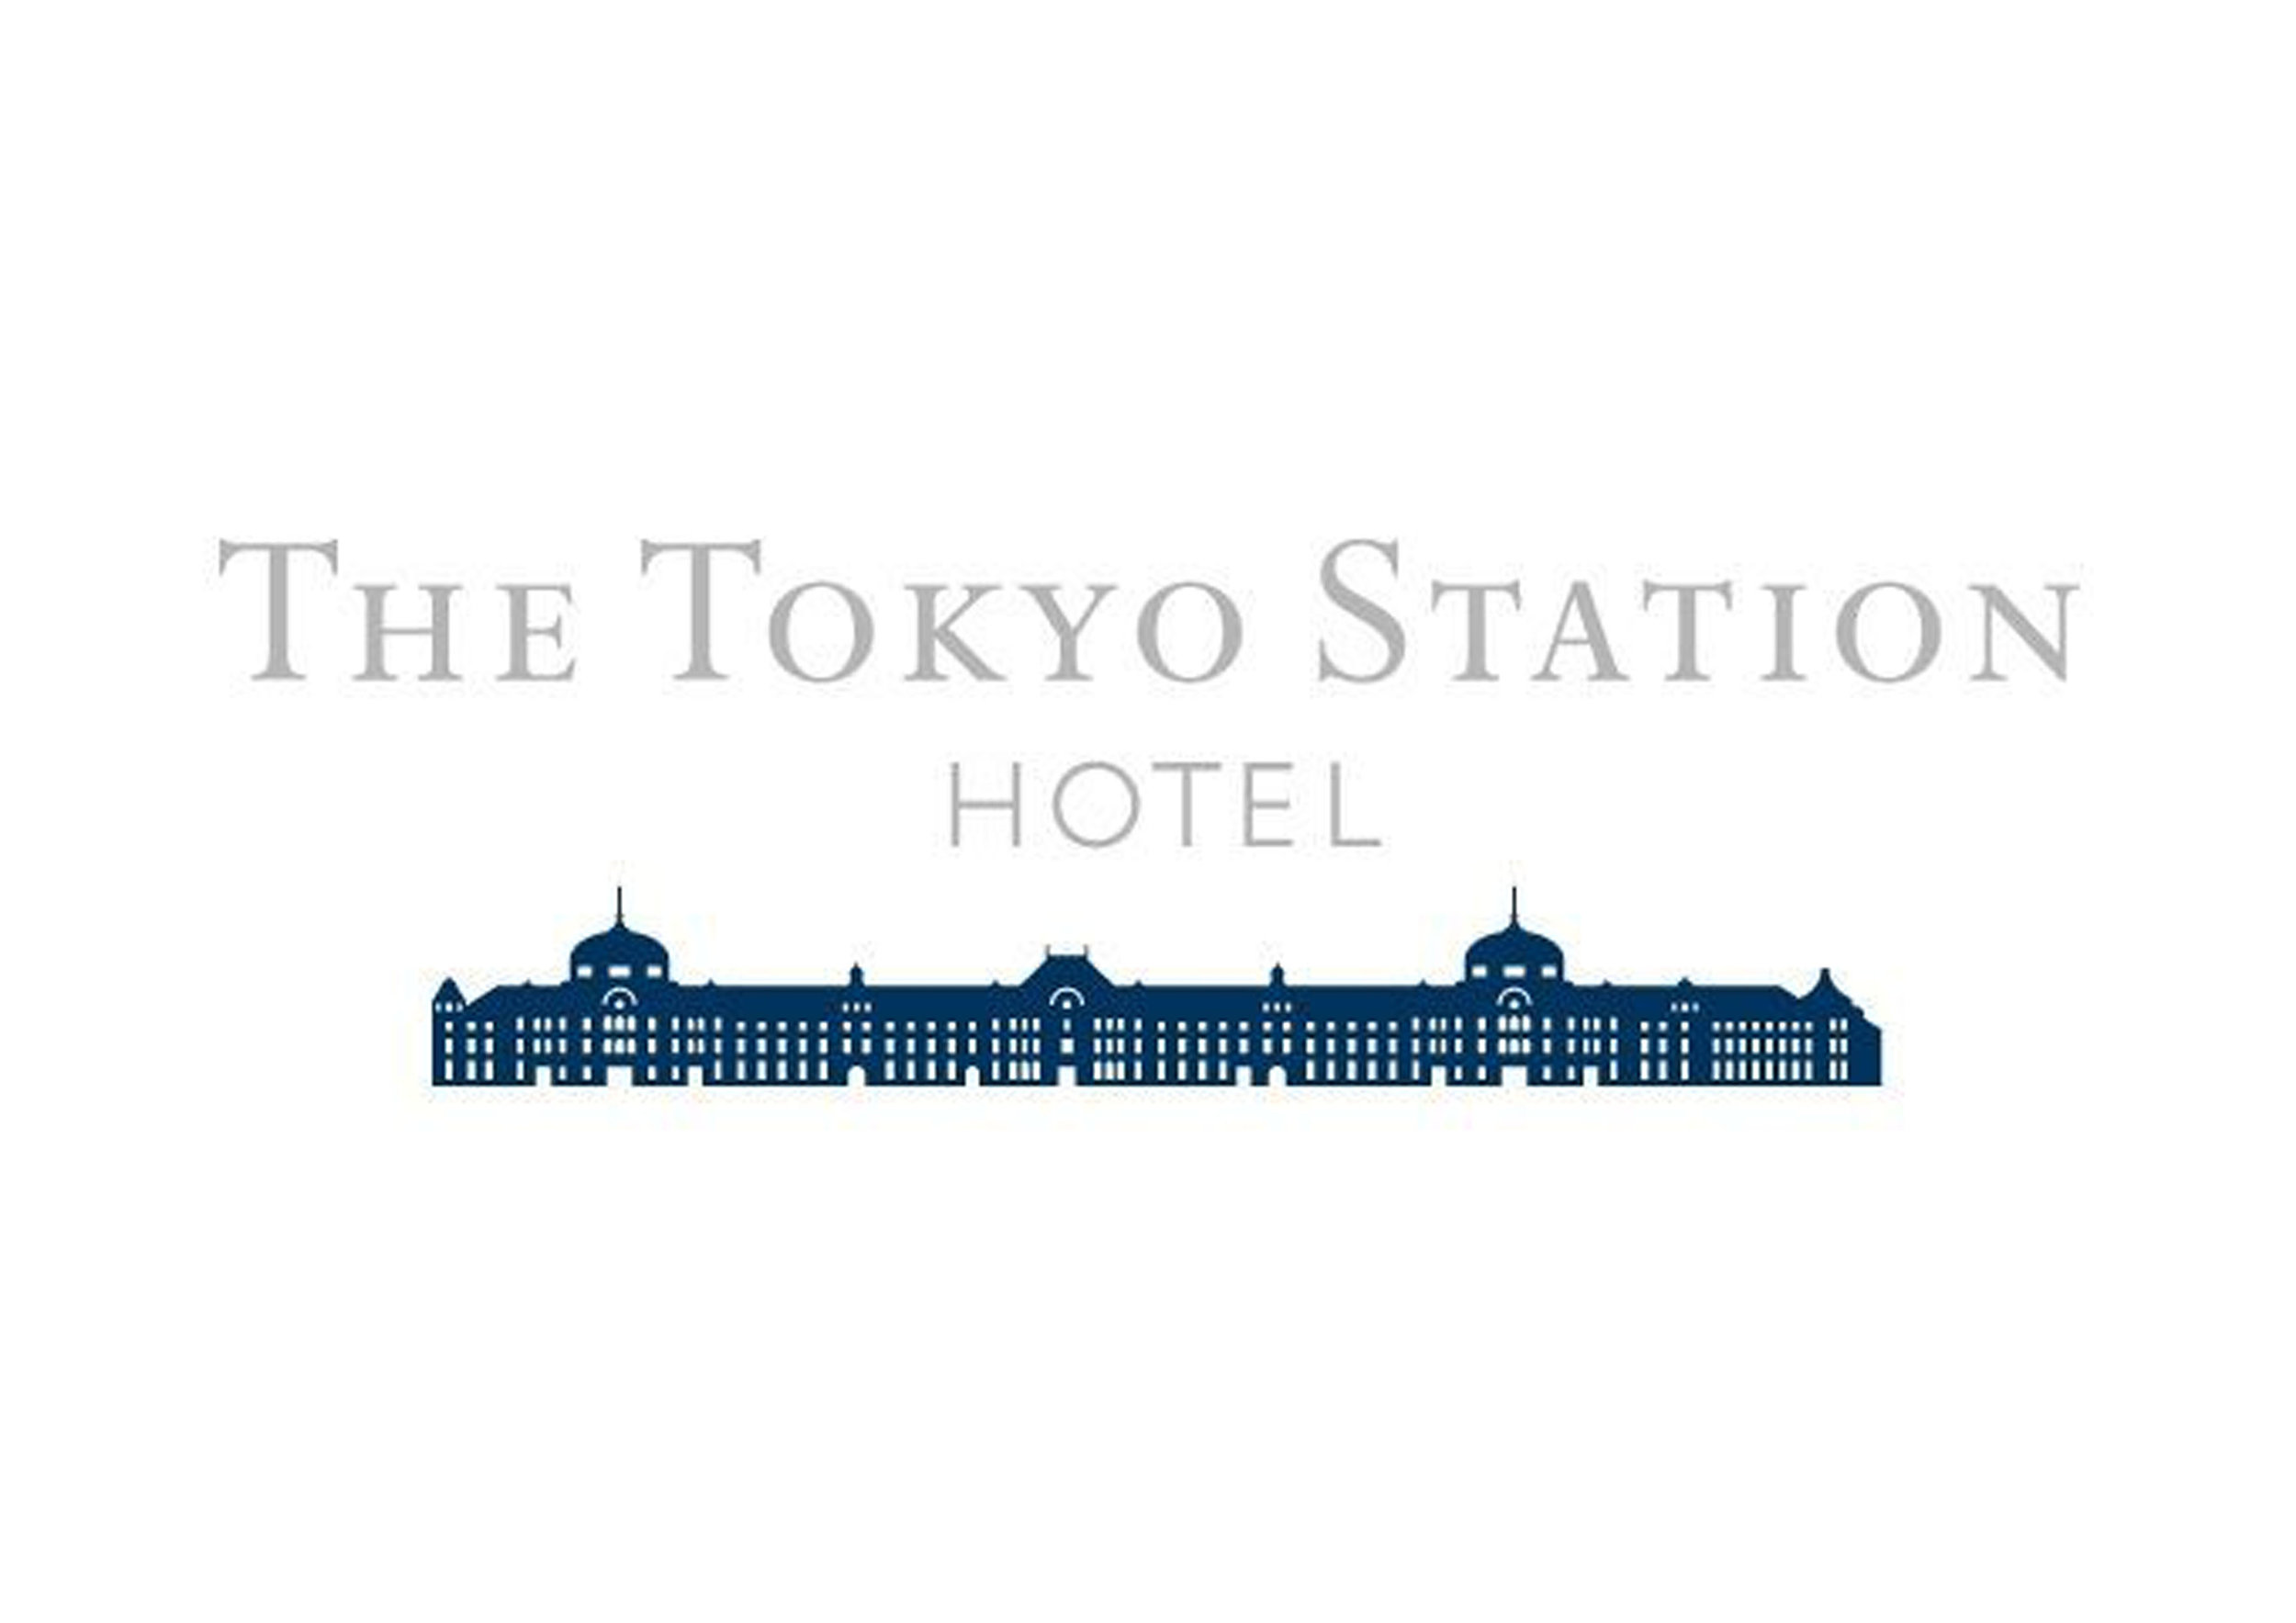  ..  The Tokyo Station Hotel 